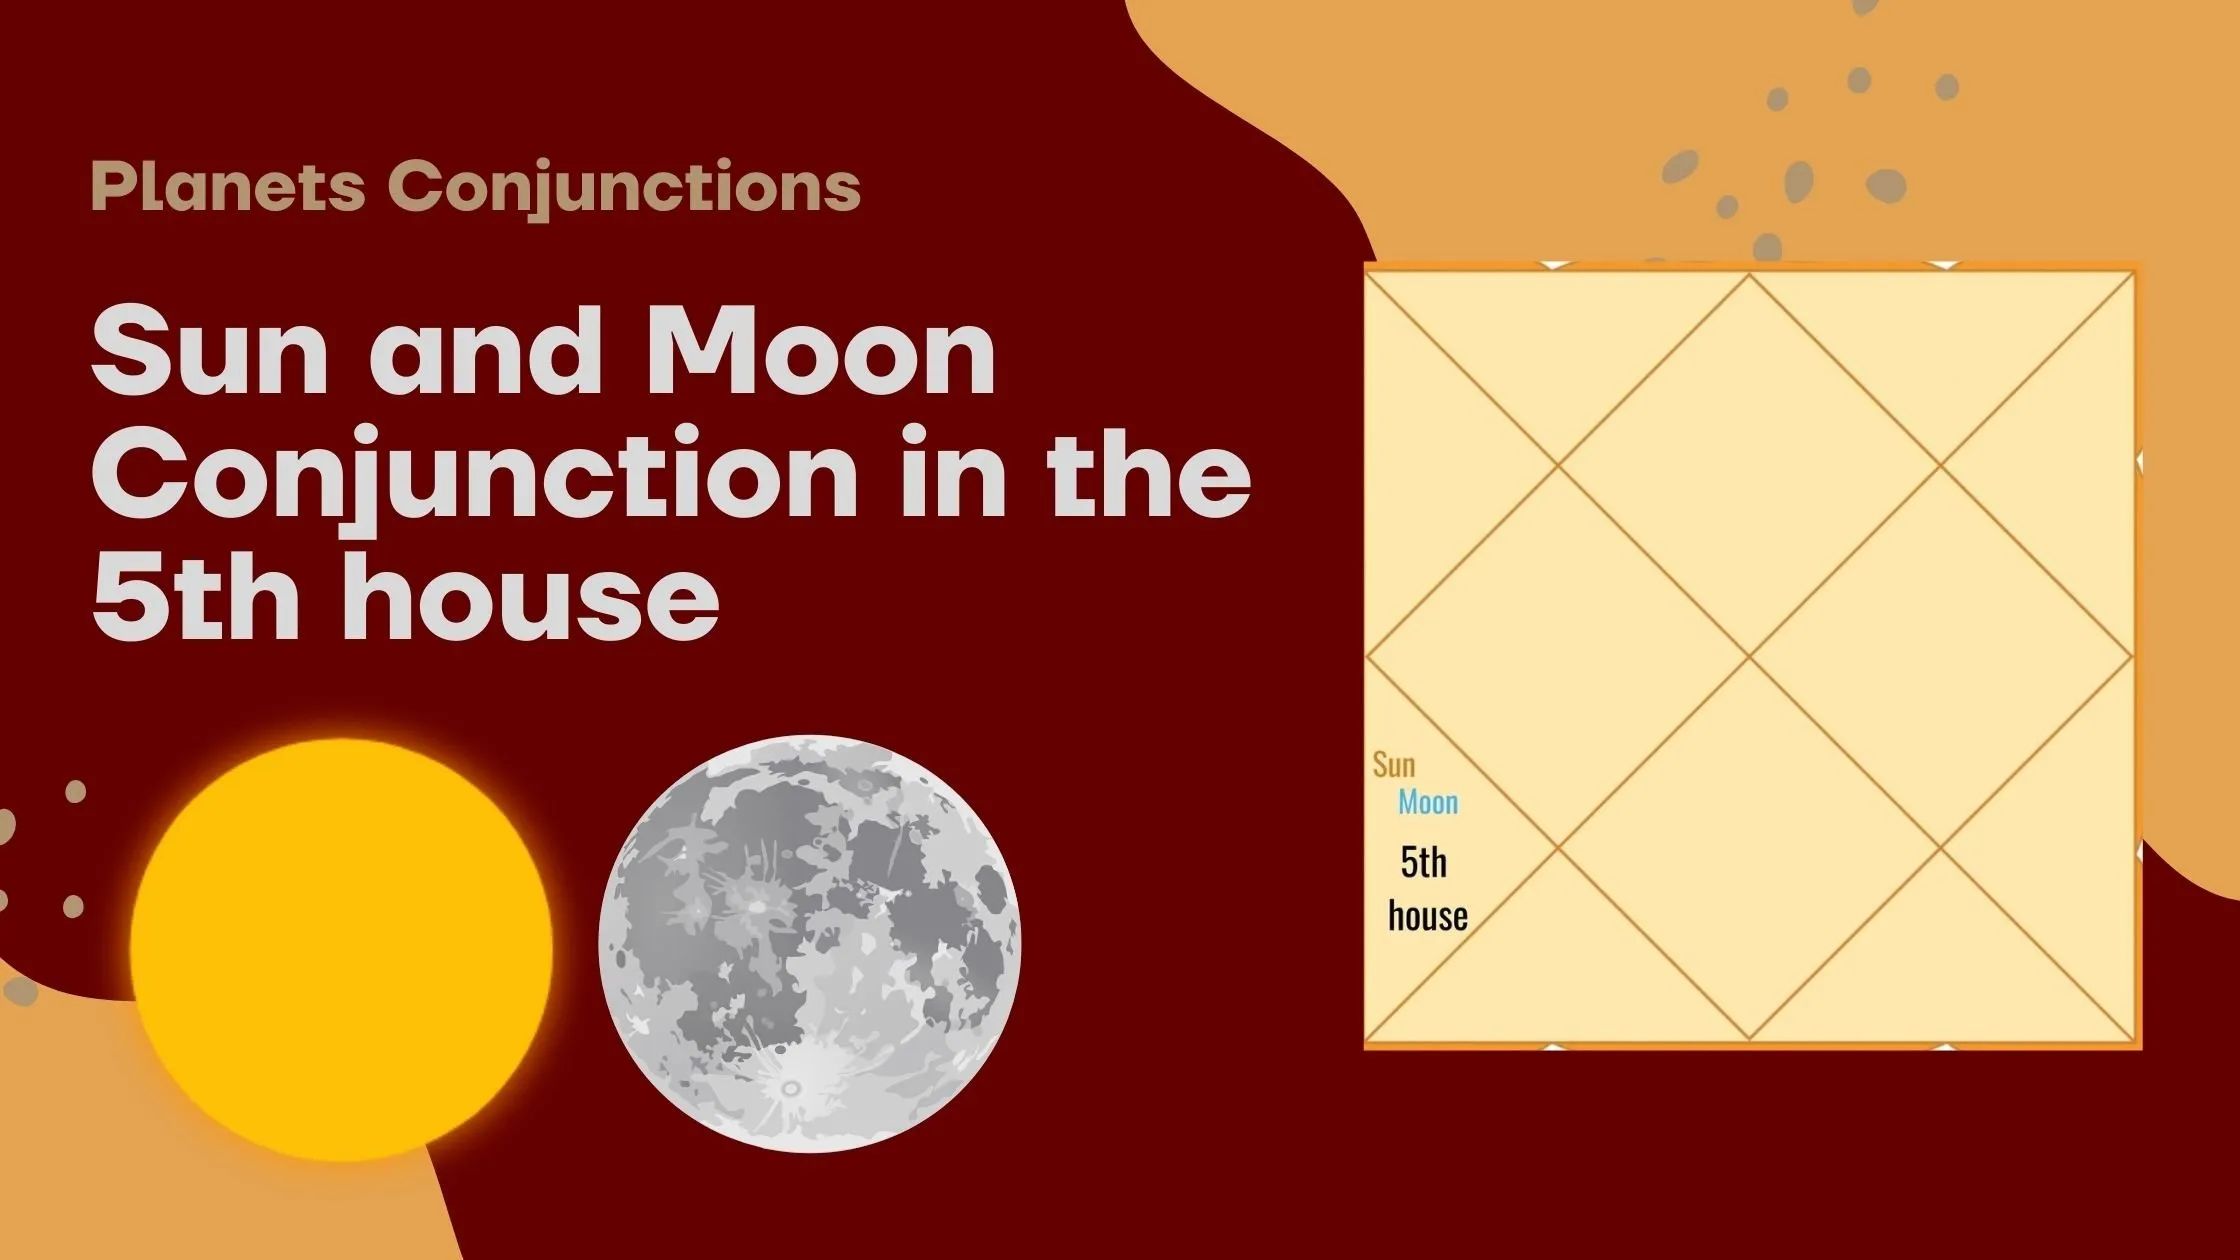 Sun and Moon Conjunction 5th house